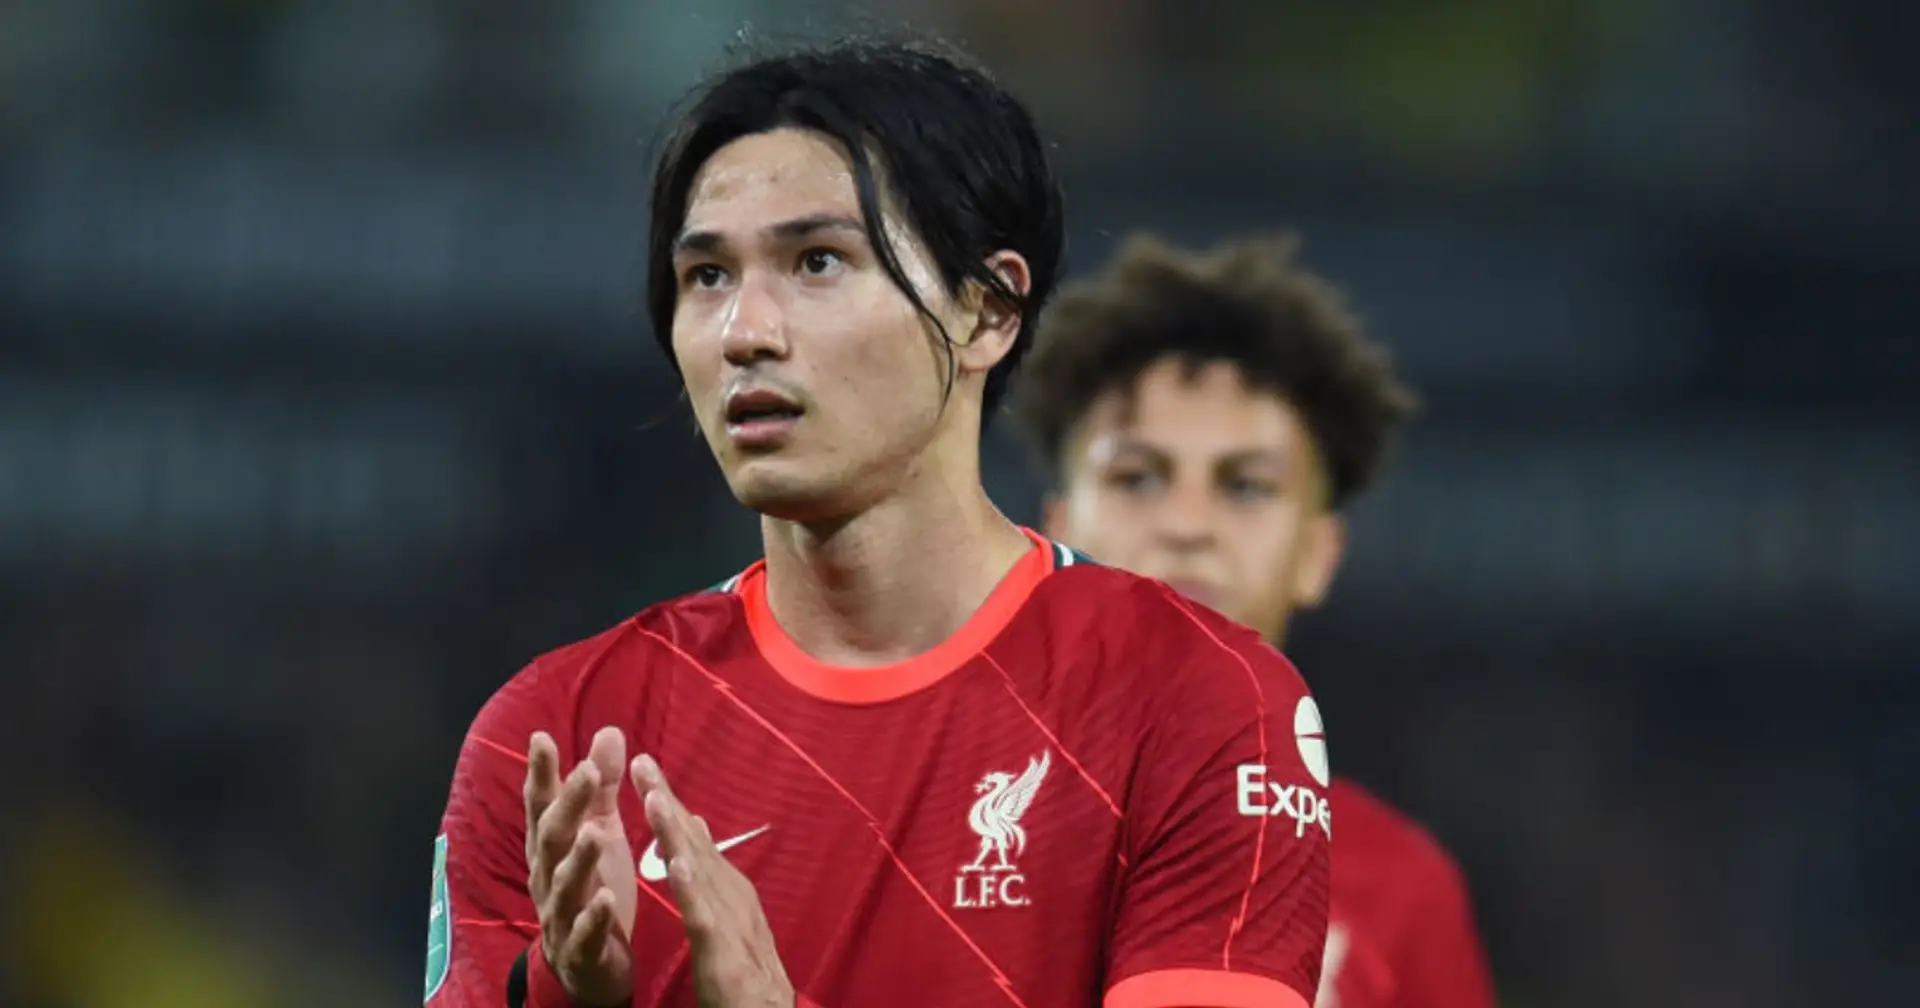 Revealed: 2 likeliest destinations for Minamino as he nears Liverpool exit